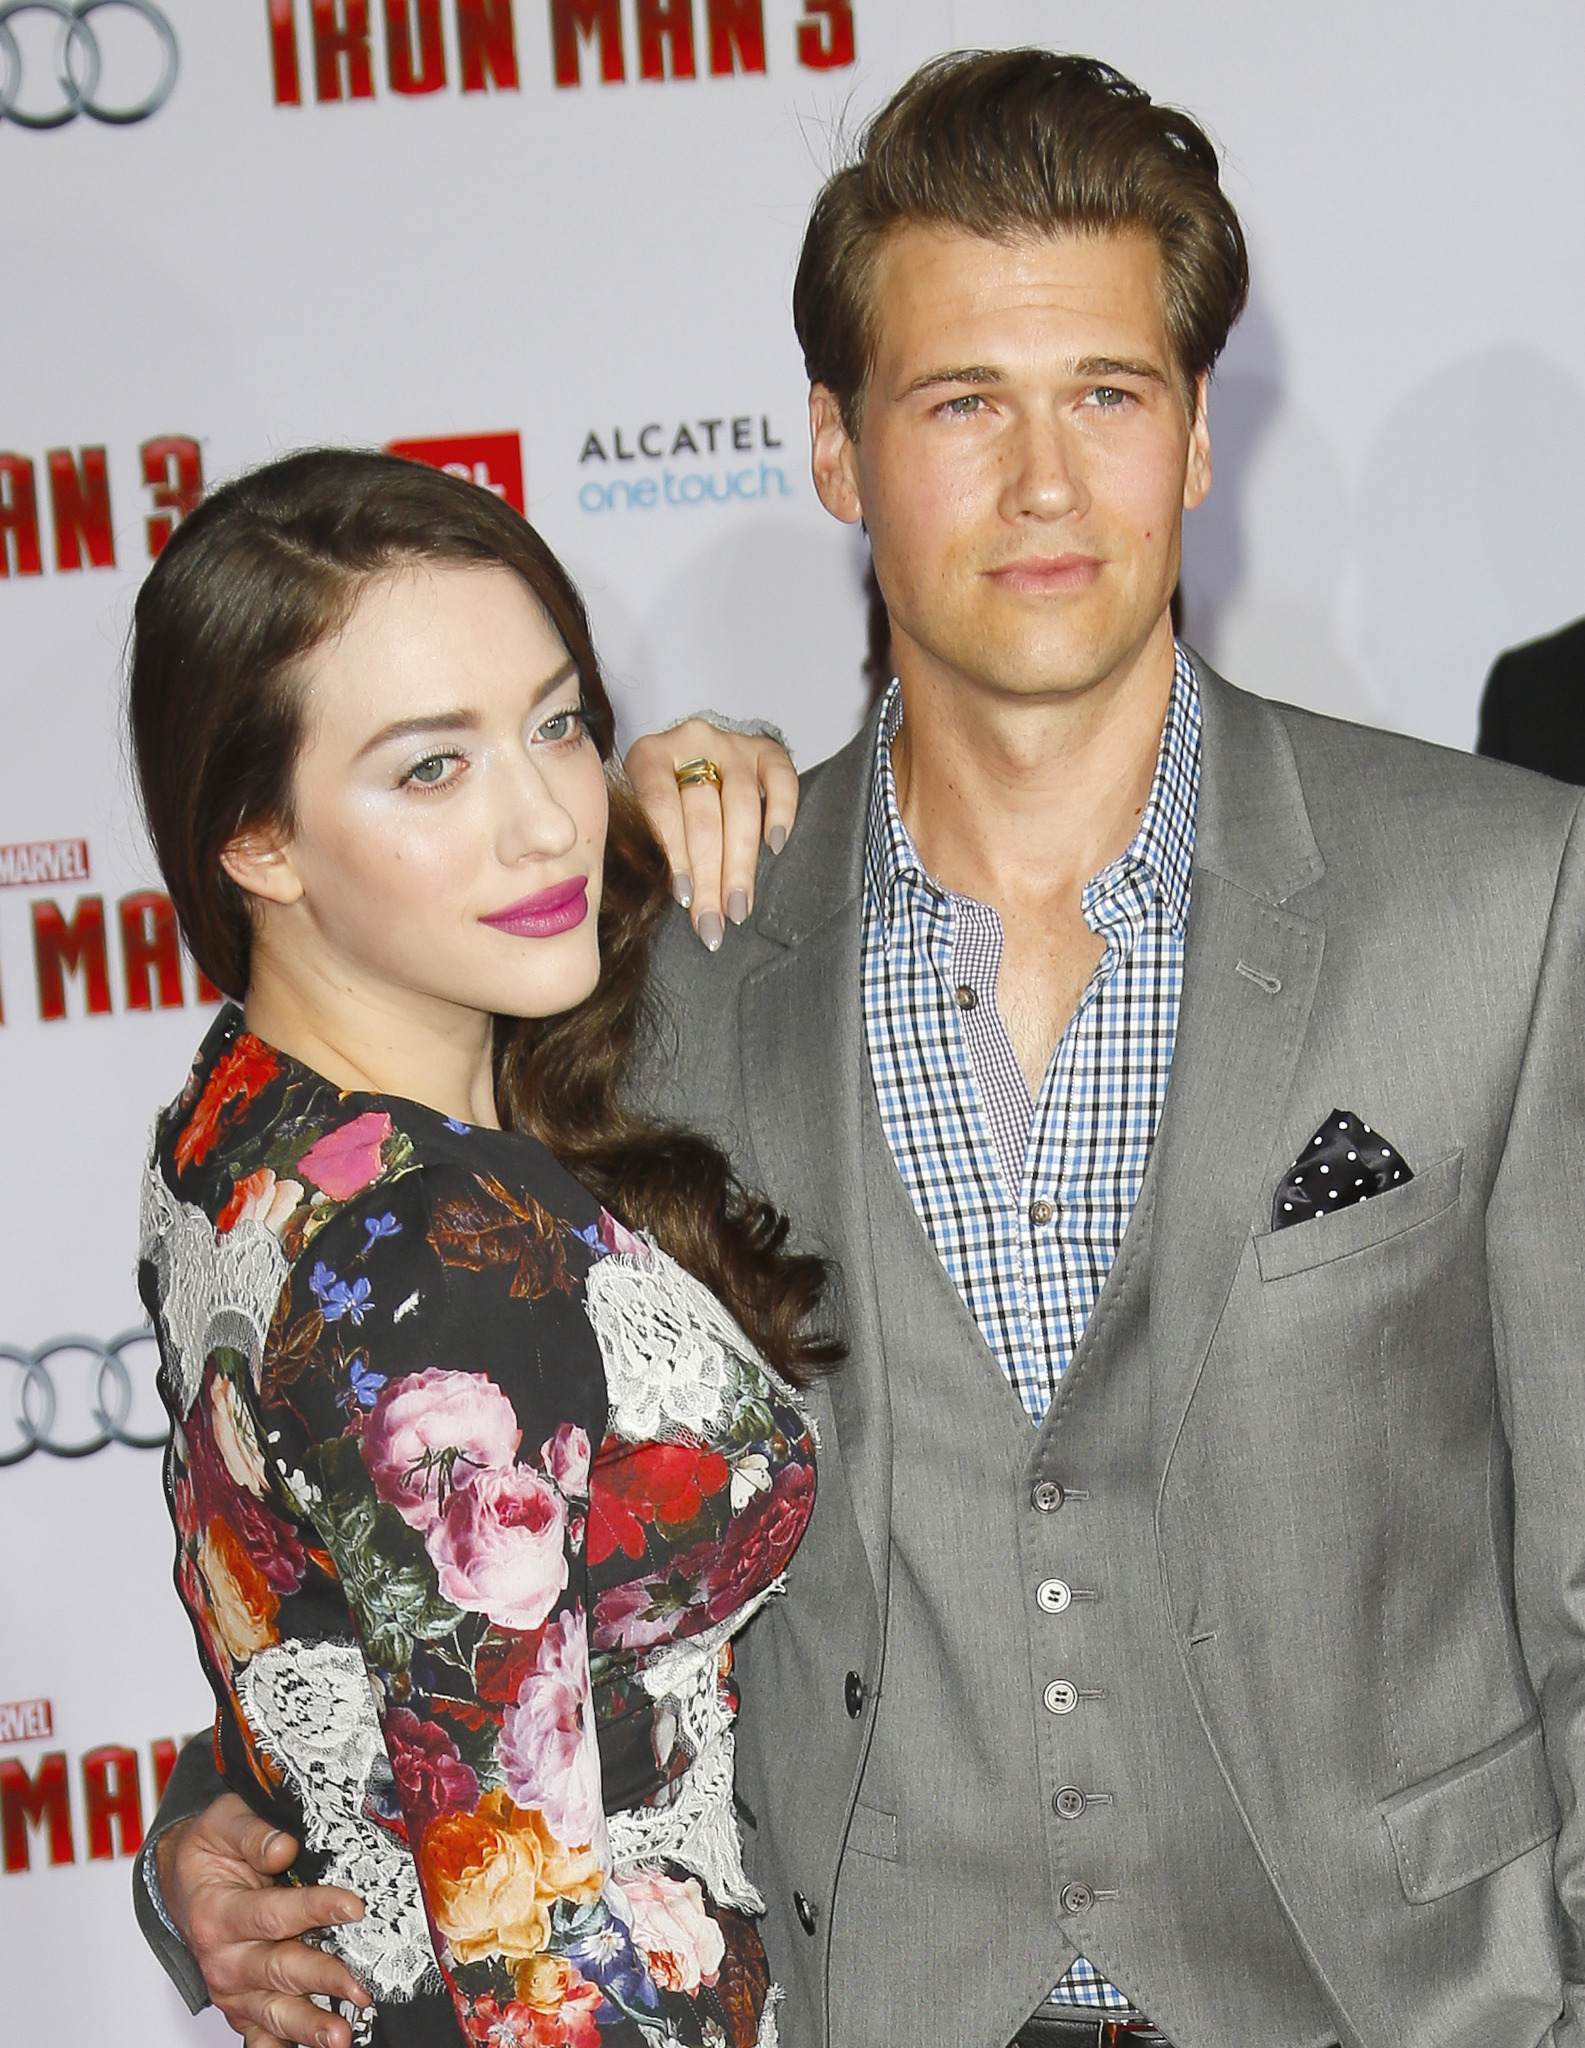 Kat Dennings and Nick Zano at event of Gelezinis zmogus 3 (2013)